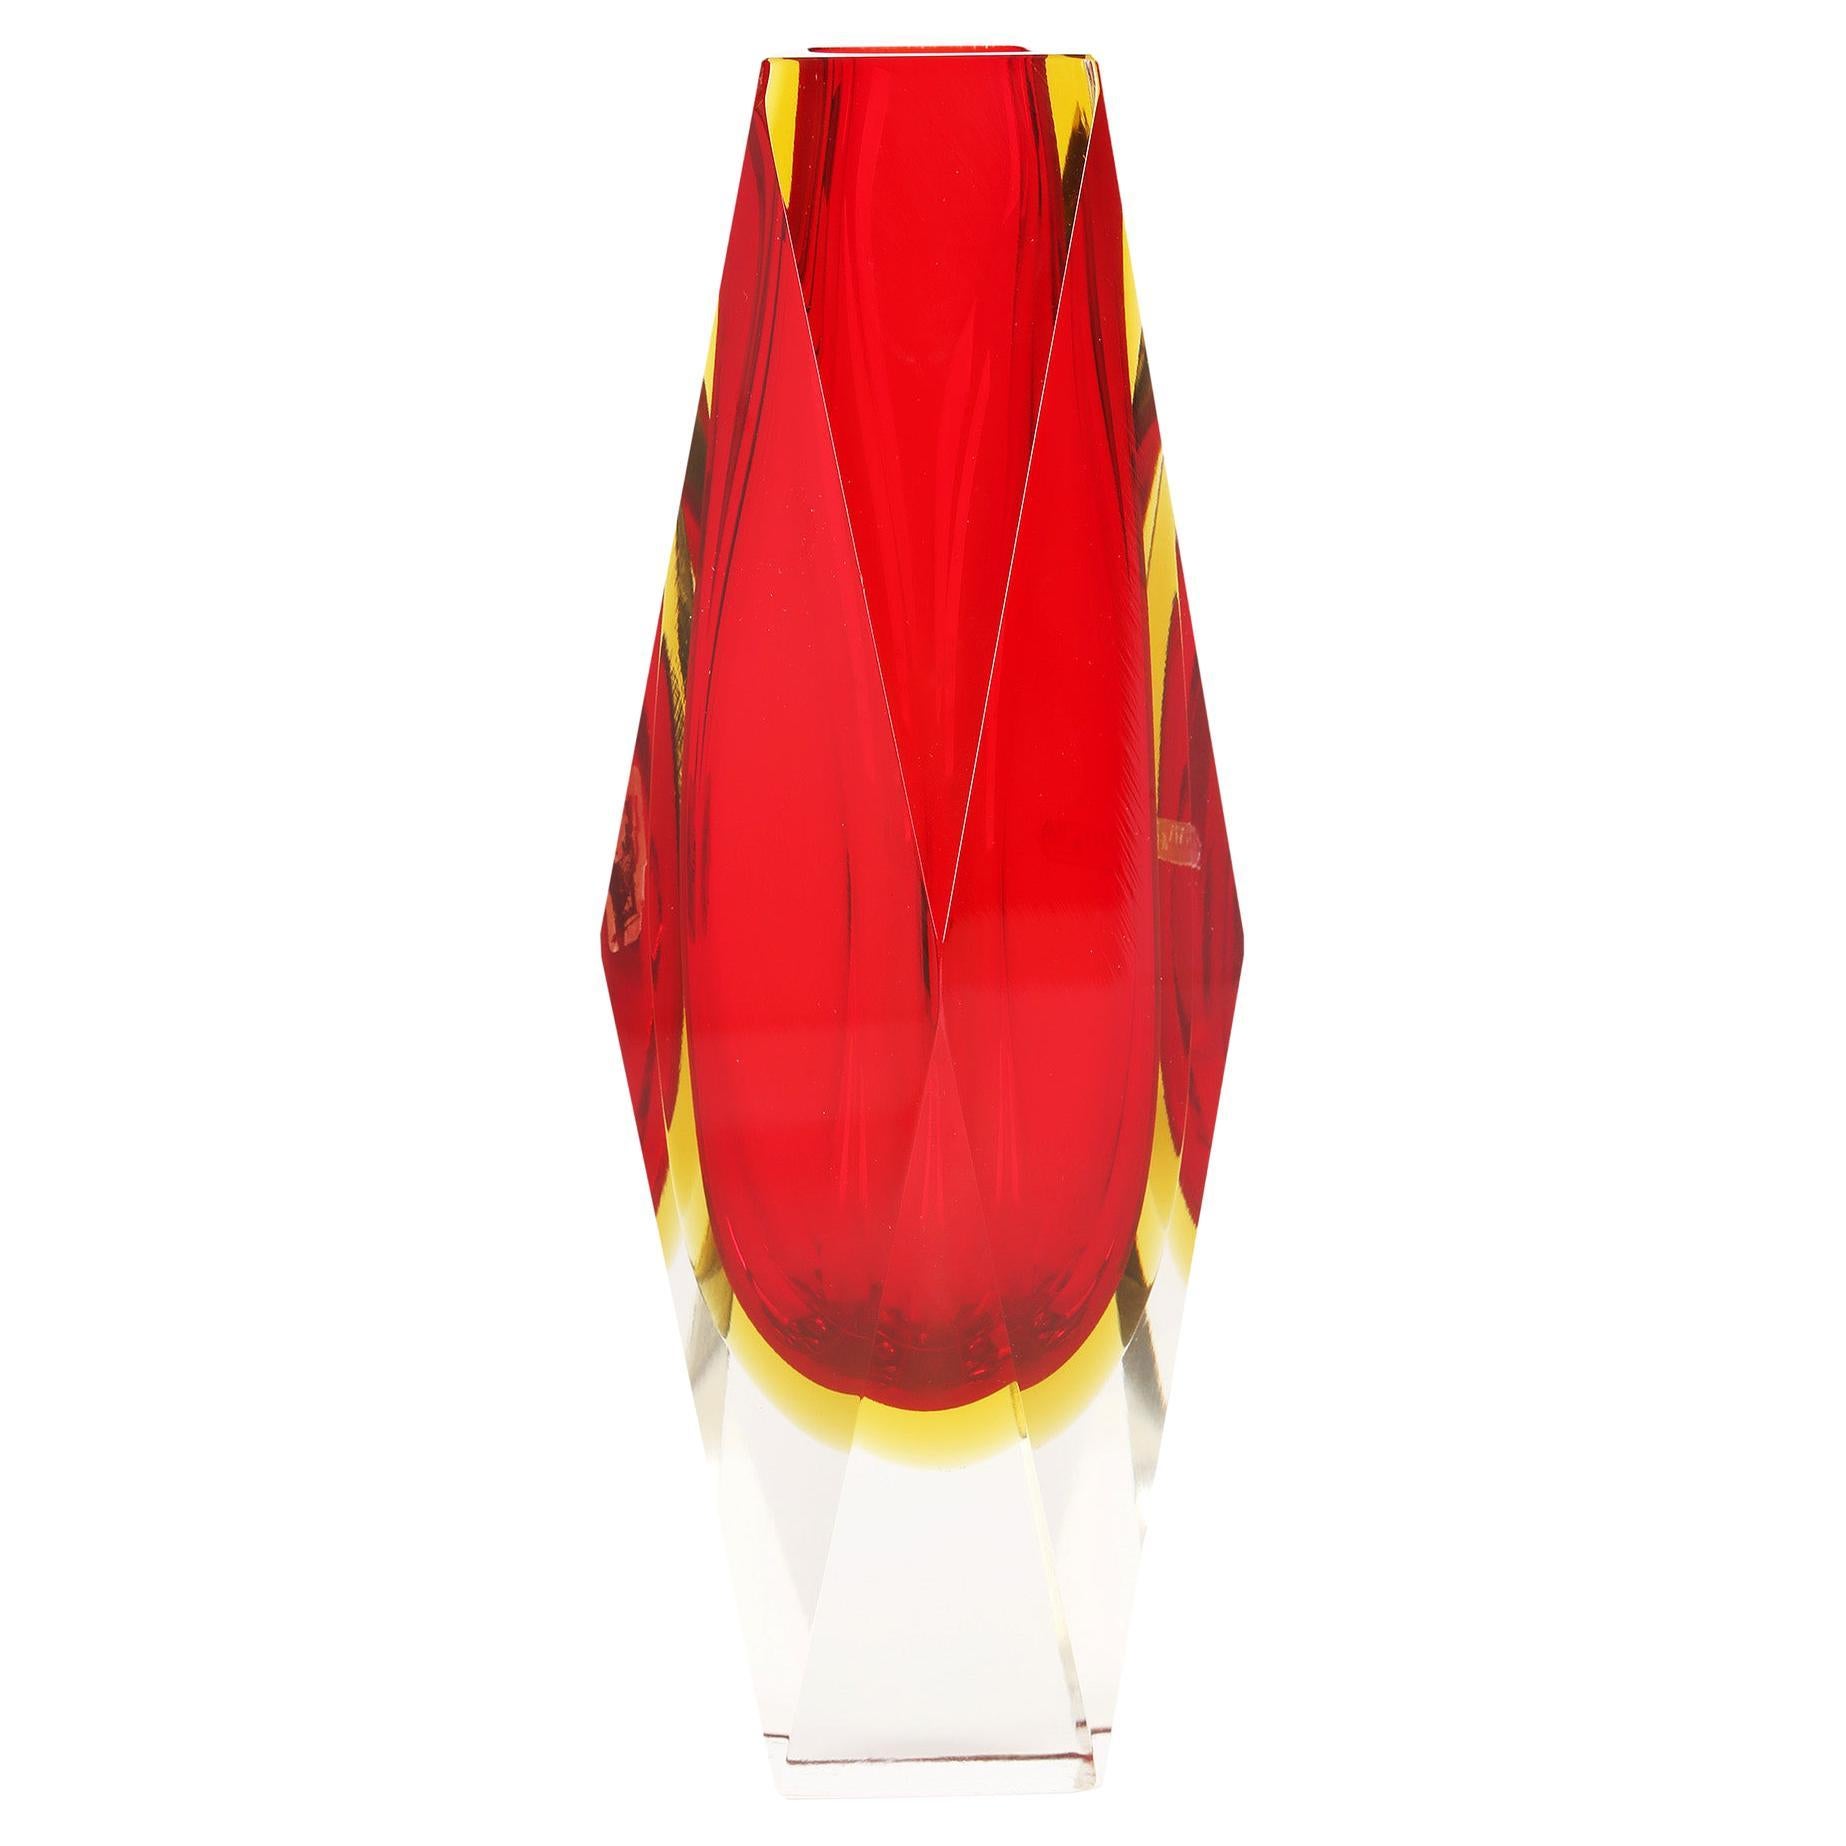 Pagnin & Bon Italian Murano Red and Yellow Sommerso Facet Cut Glass Vase